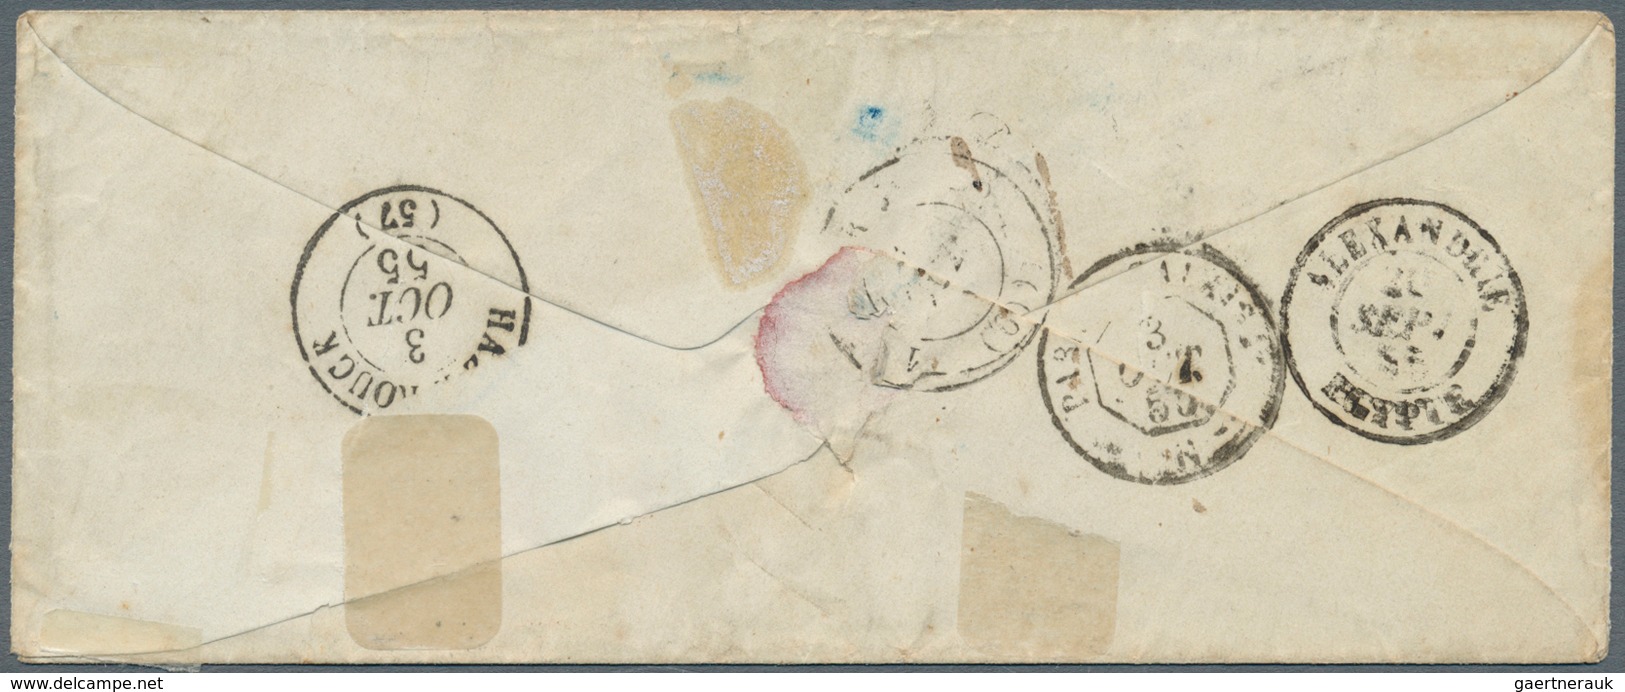 Holyland: 1855, "JAFFA SYRIE 18/SEPT/55" Black Cds. Of French Levant Post Office On Small Envelope W - Palestine